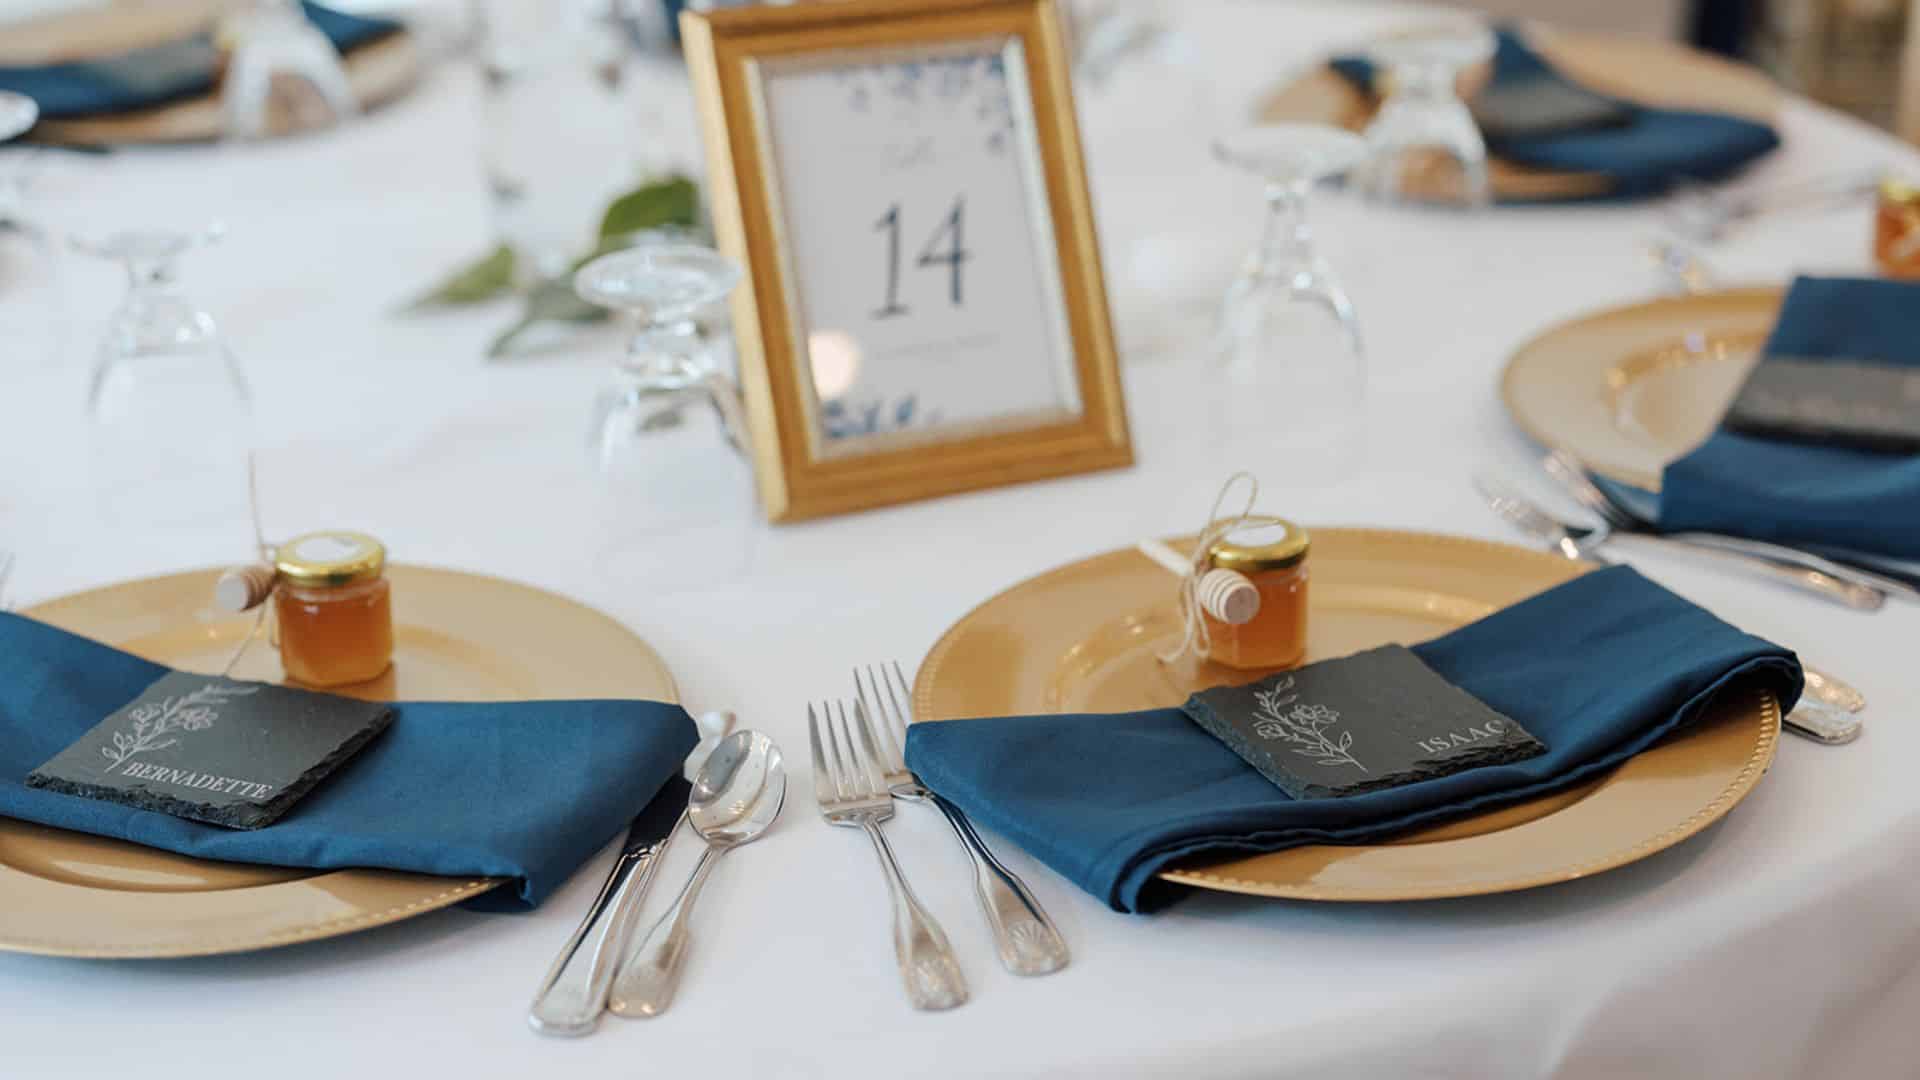 wedding table setting with white tablecloth, gold chargers, dark blue napkins, silverware, glassware, party favors, and decor